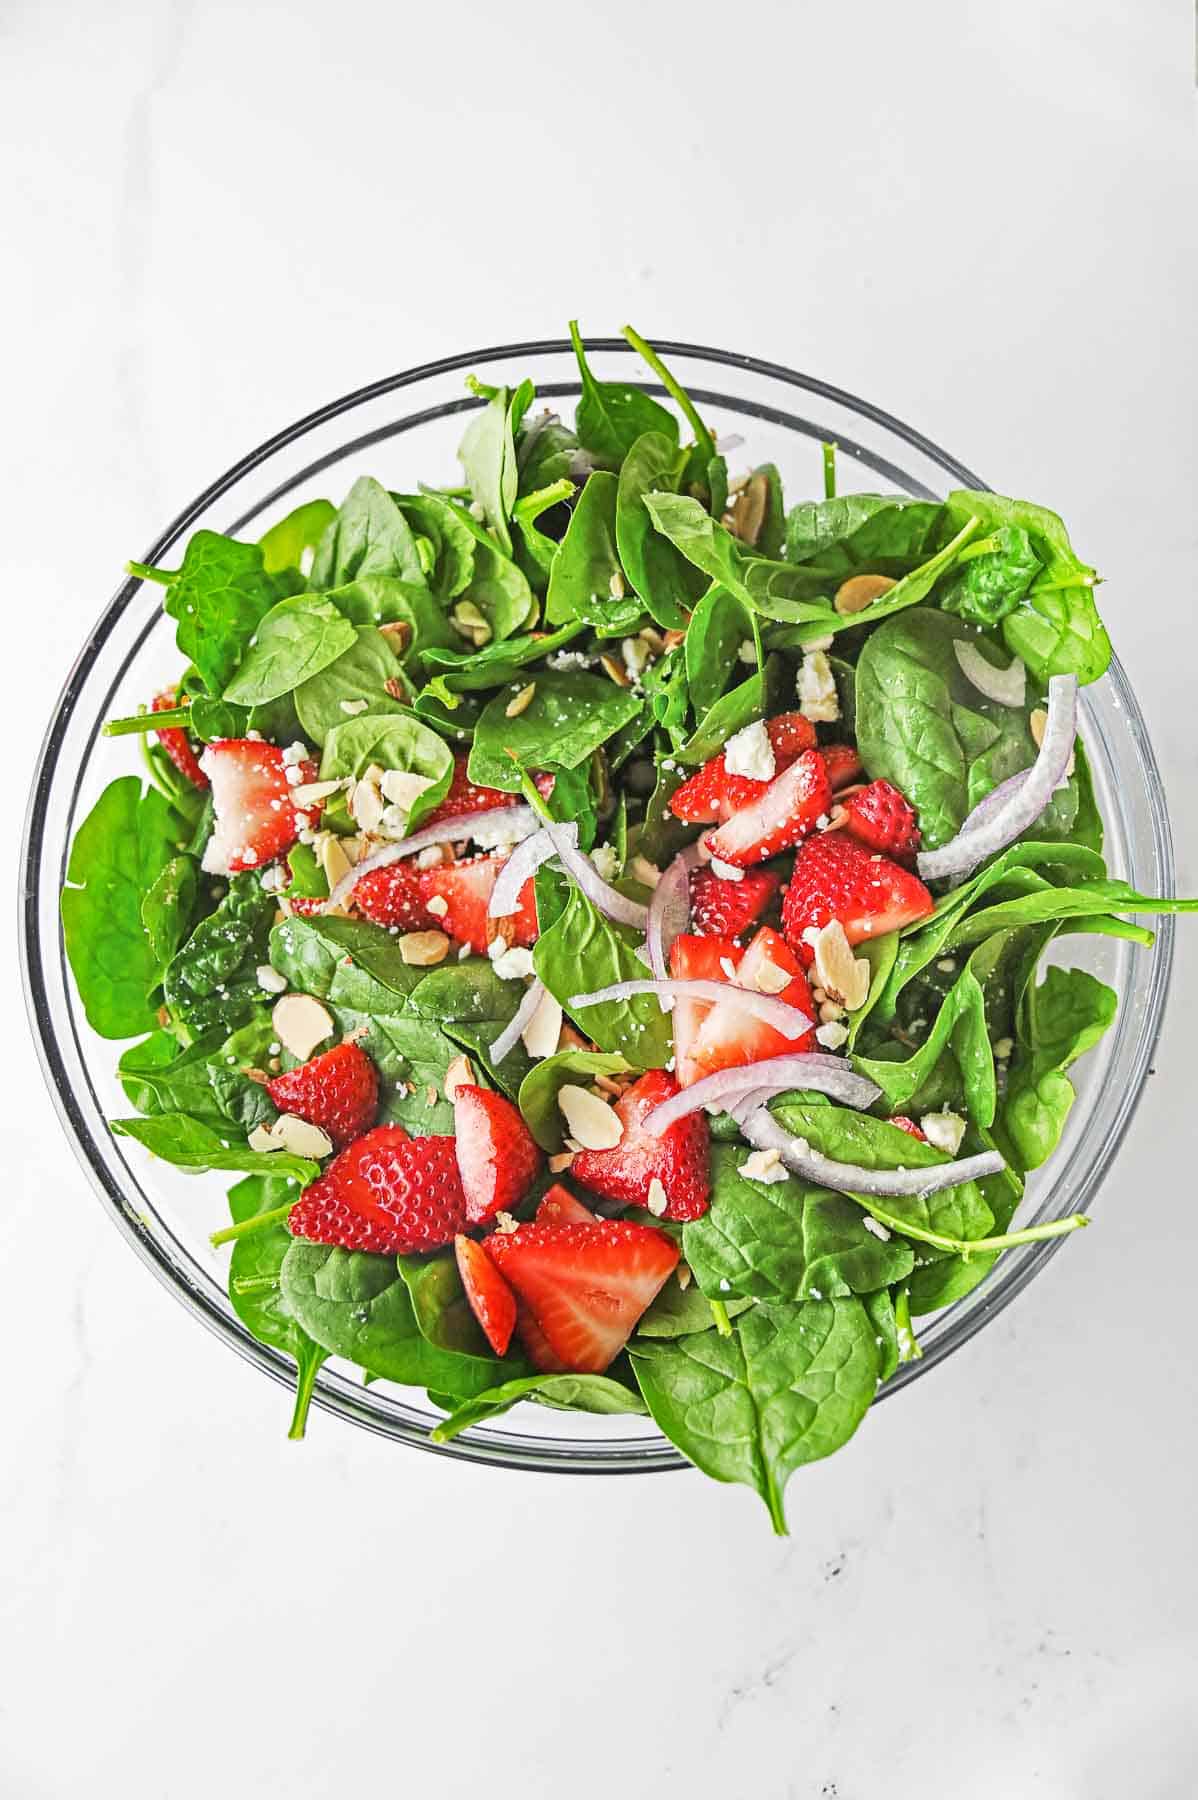 Large glass bowl of strawberry spinach salad ingredients mixed together.